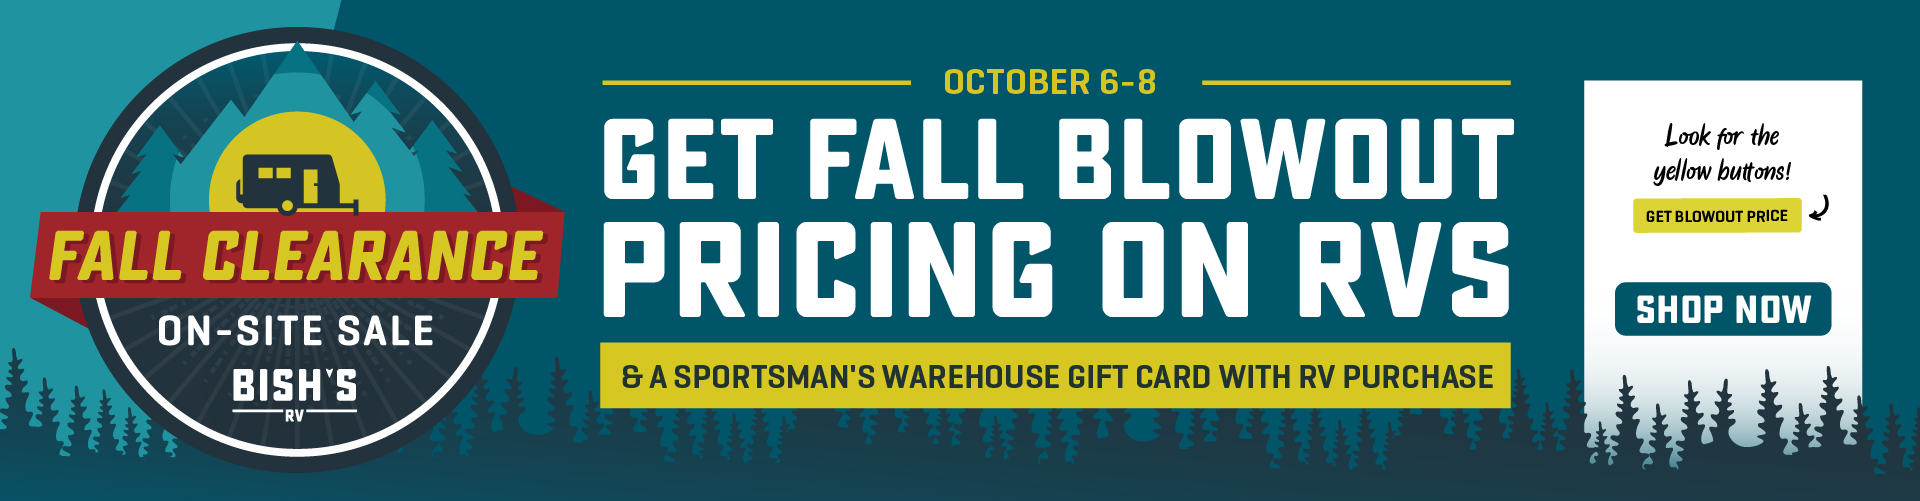 Fall Clearance On-Site Sale - Get Fall Blowout Pricing!